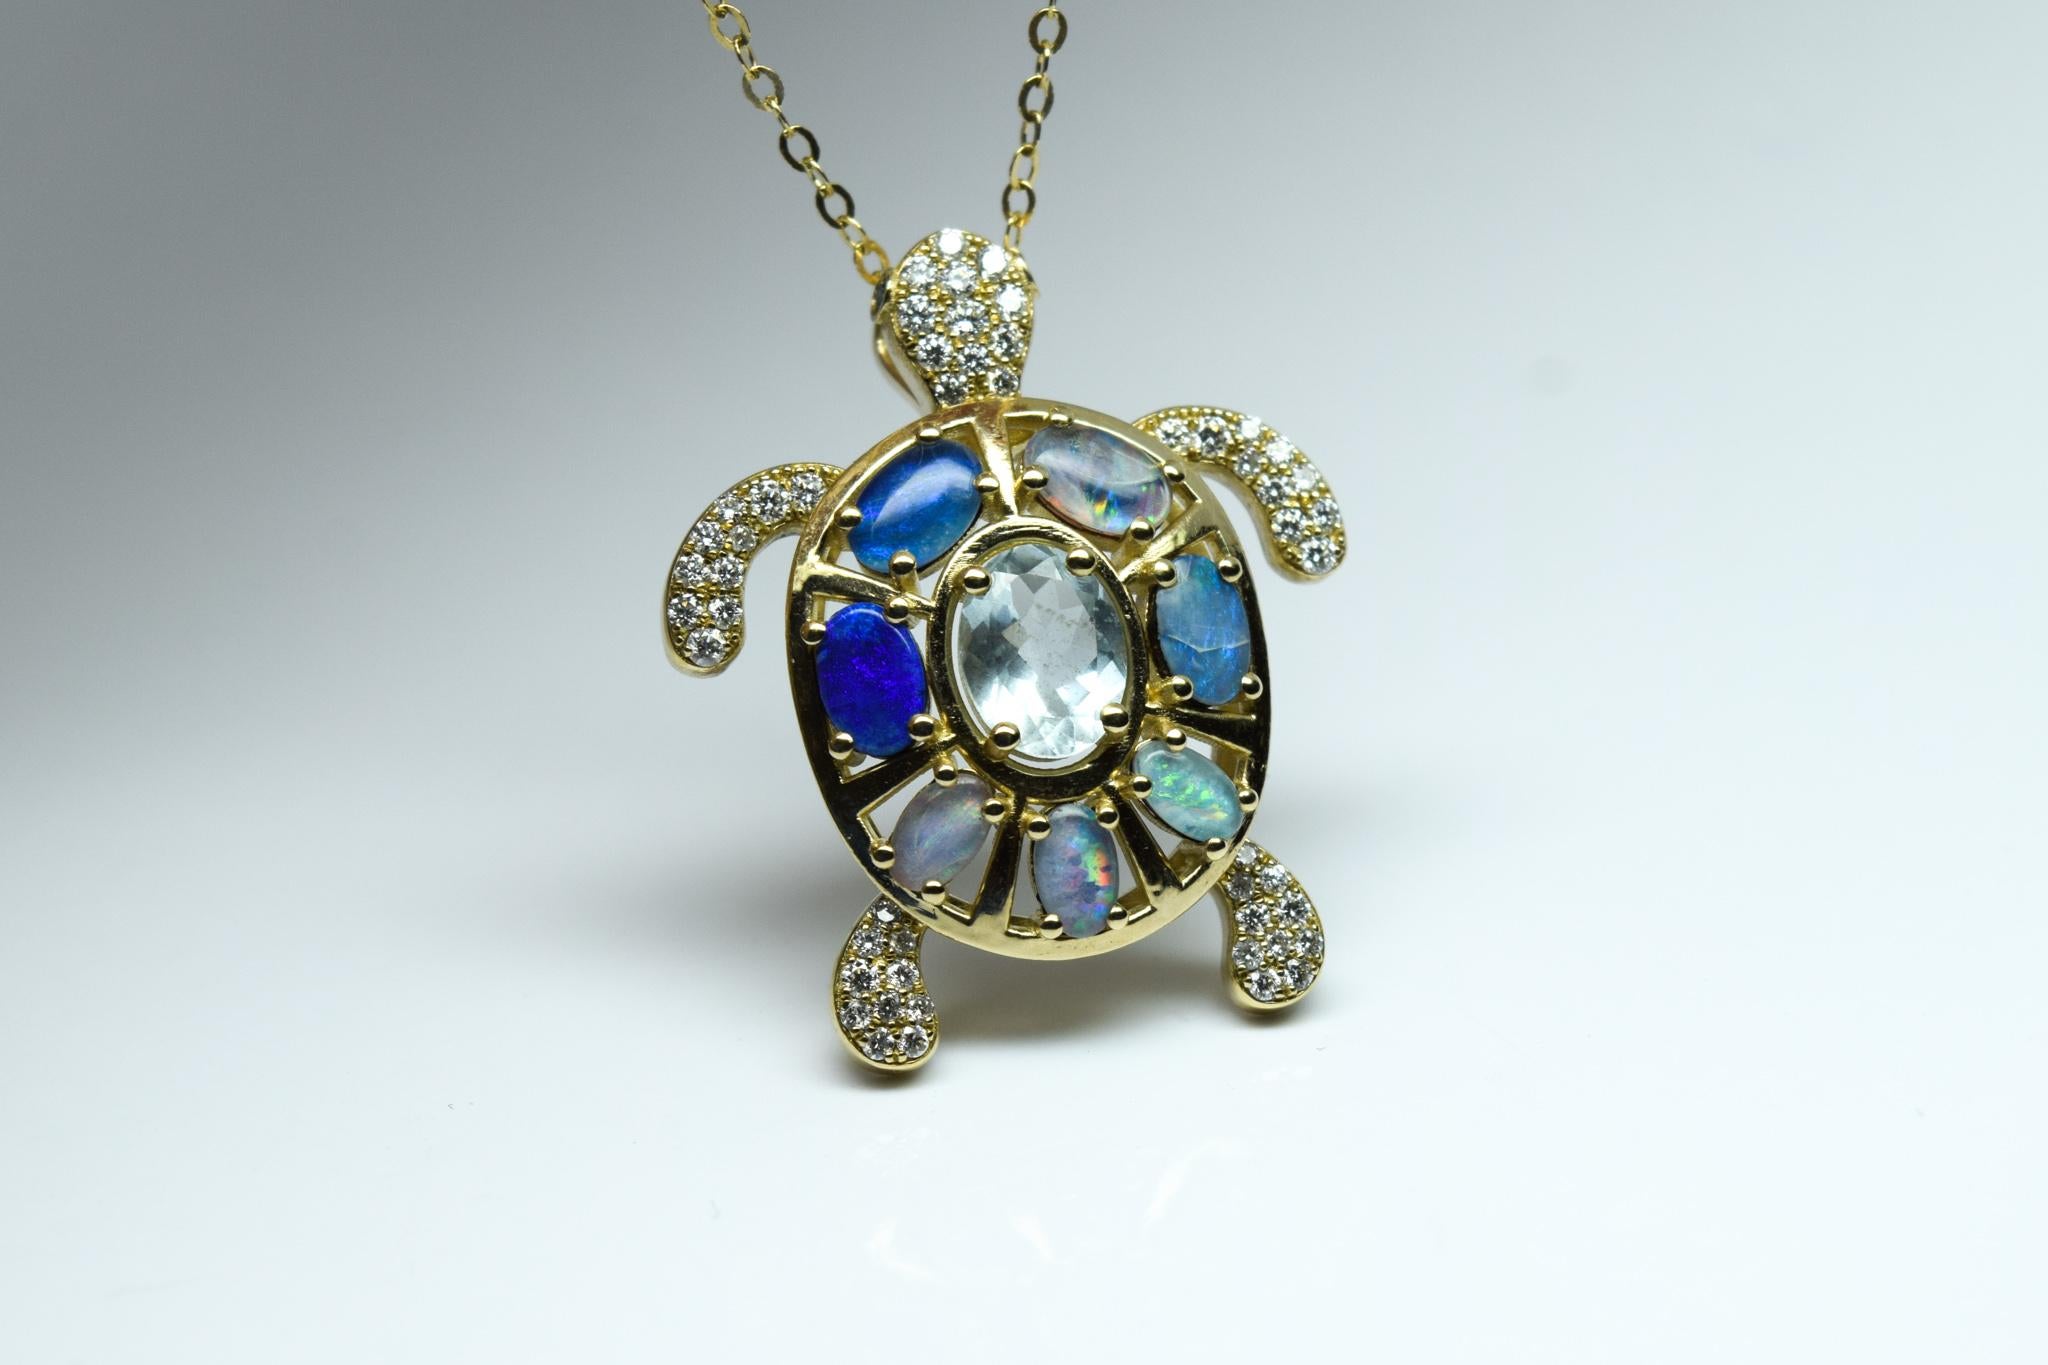 What an incredible piece of jewelry, its a beautiufl turtle made with aquaamrine and natural Australian opals and sparkling diamonds (Vs clarity, F-G color) the metal is 14KT gold and the chain is 18